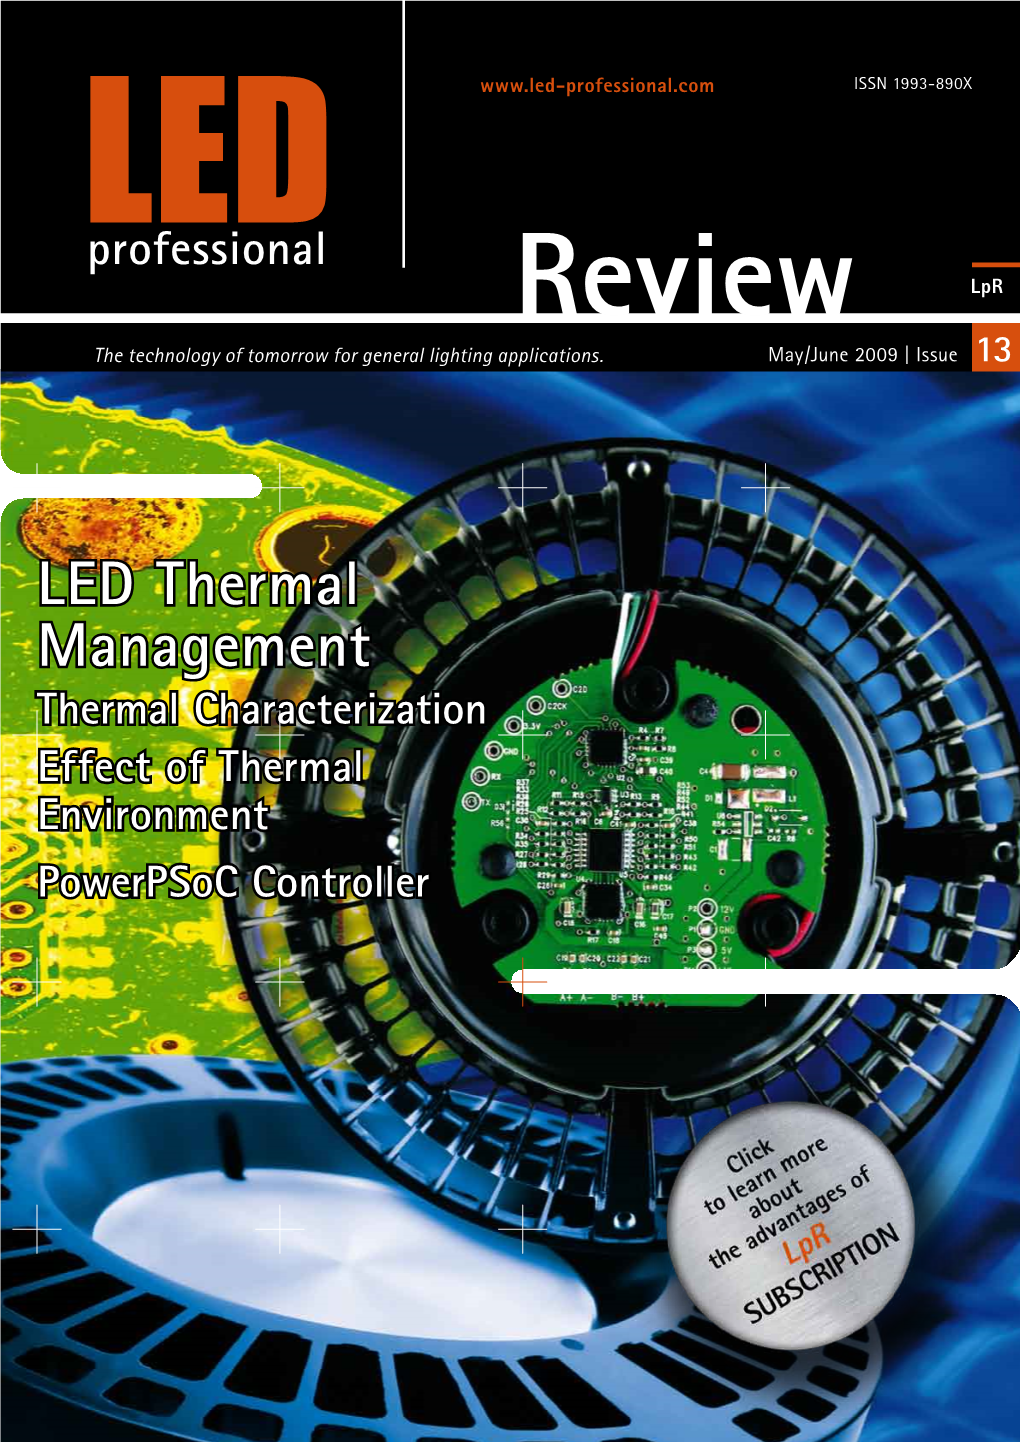 LED Thermal Management Thermal Characterization Effect of Thermal Environment Powerpsoc Controller